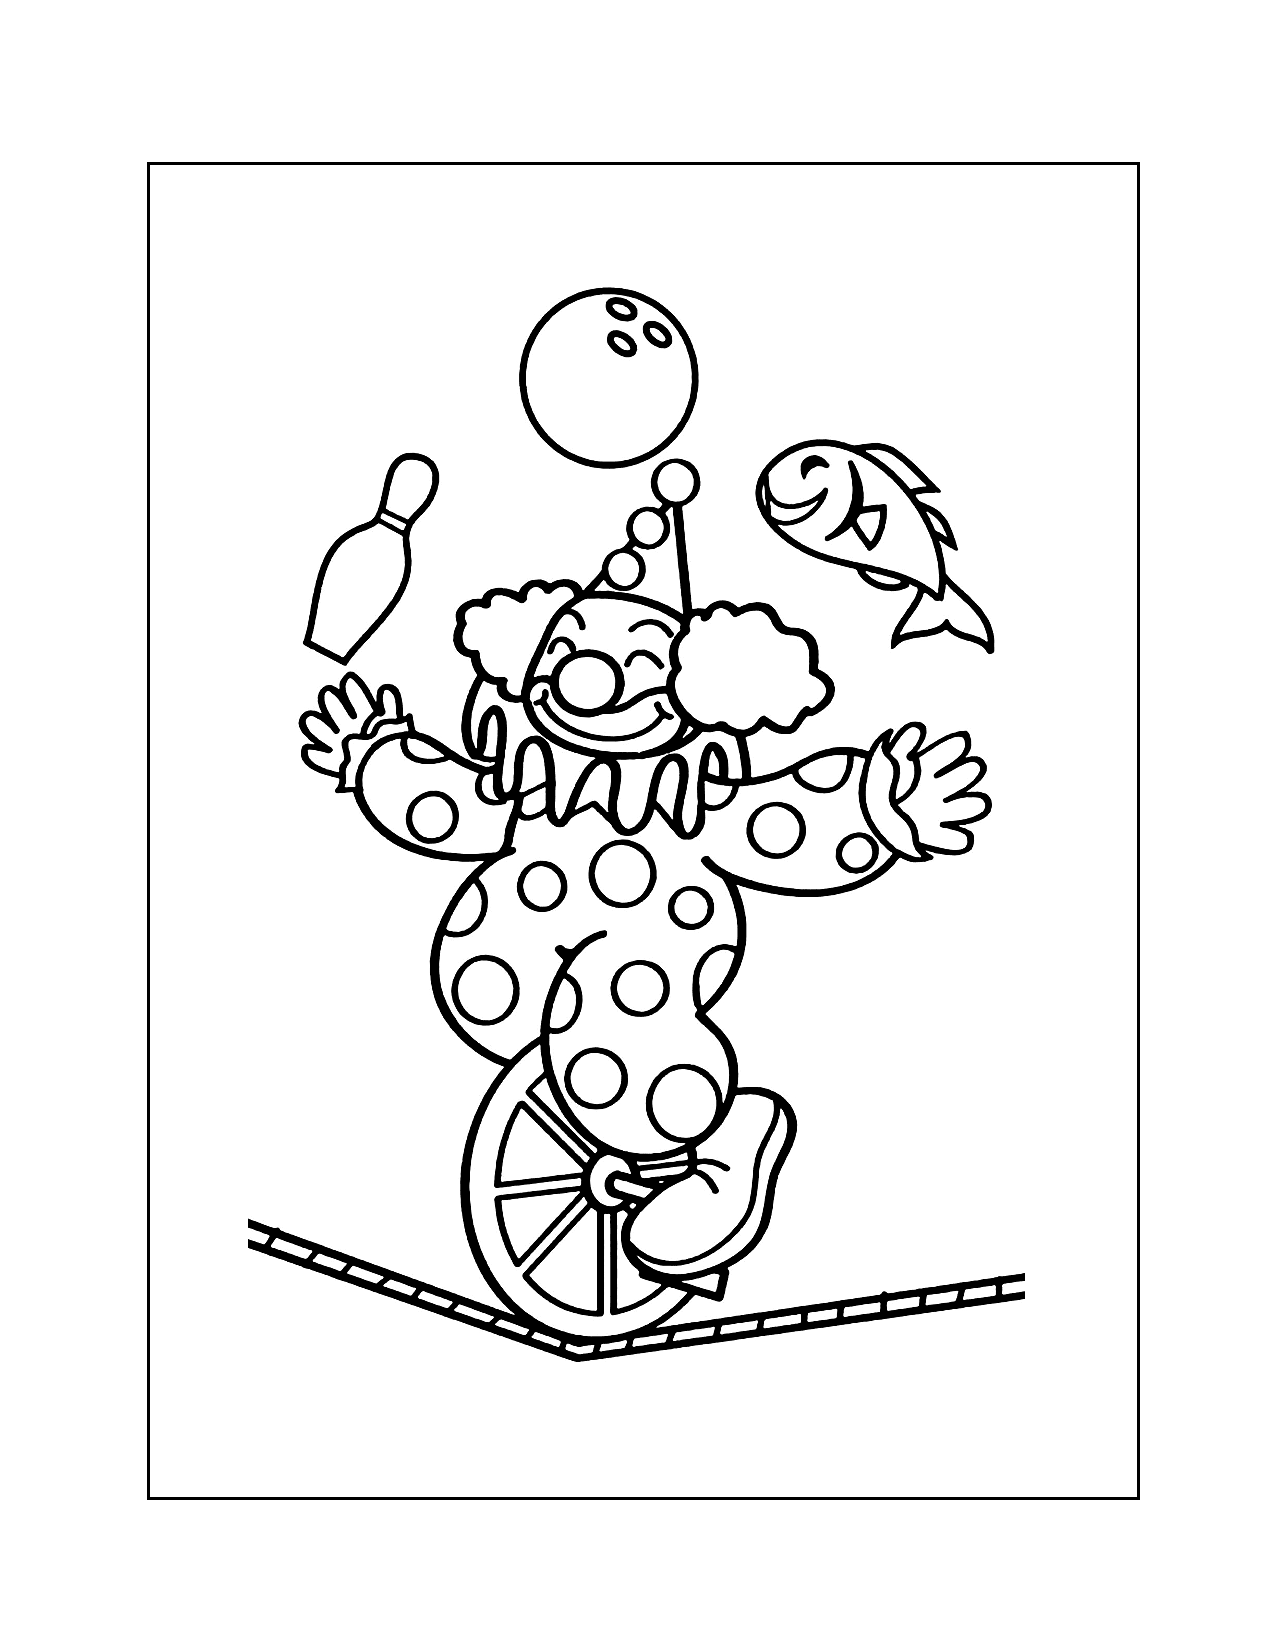 Juggling Clown On Unicycle Coloring Page